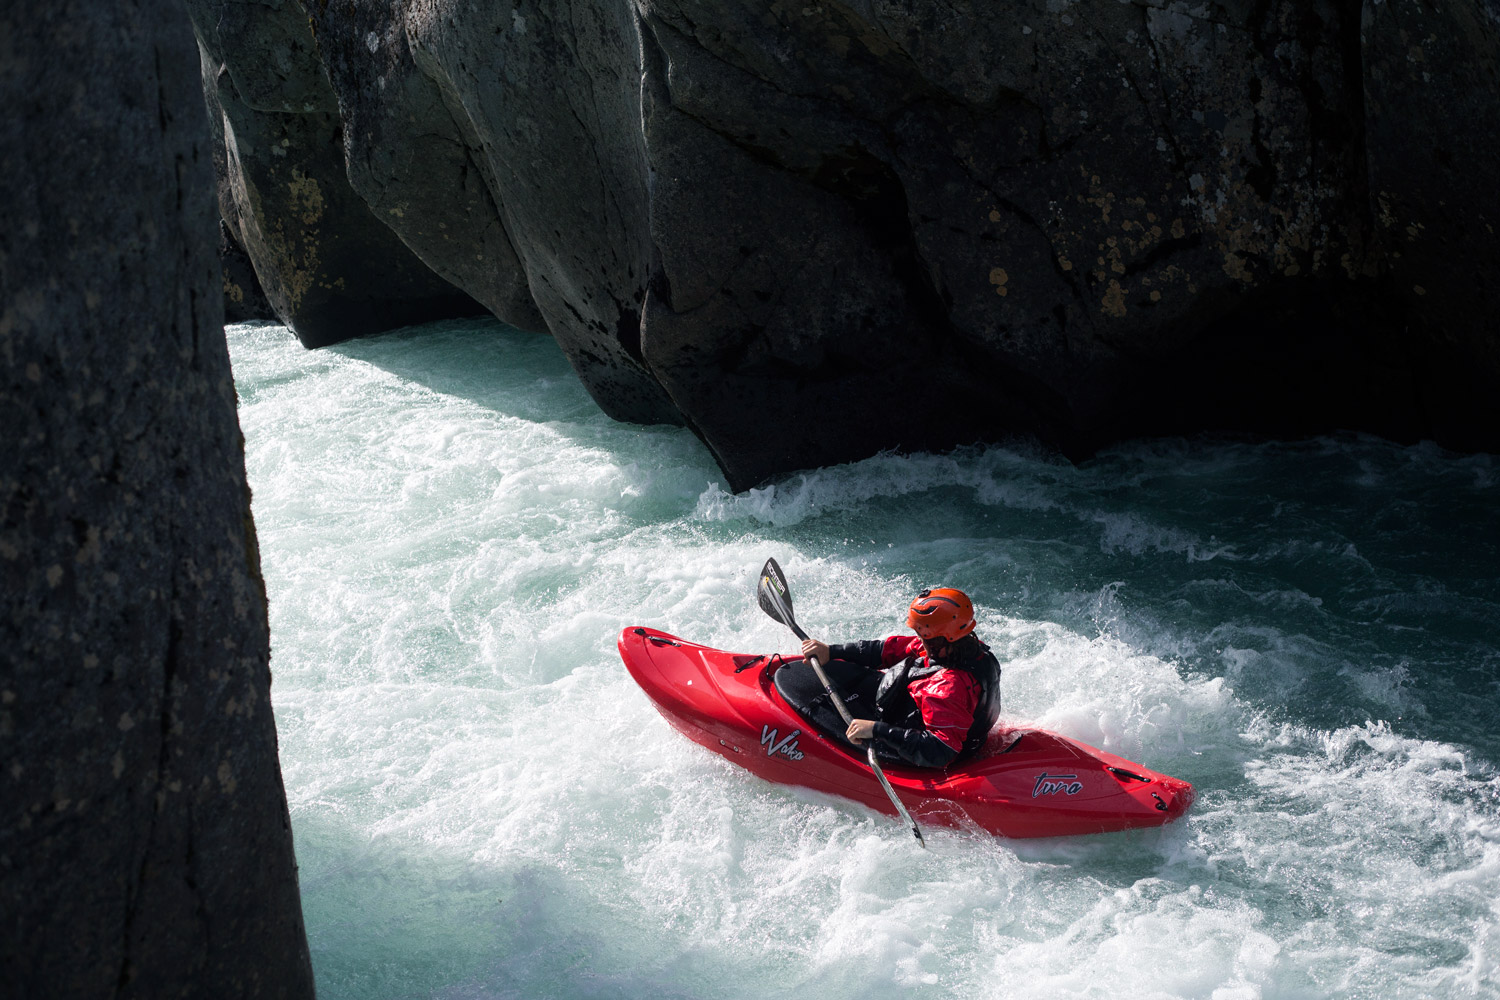 Ryan paddles towards the take out point of the Cheakamus River in Canada's British Columbia.